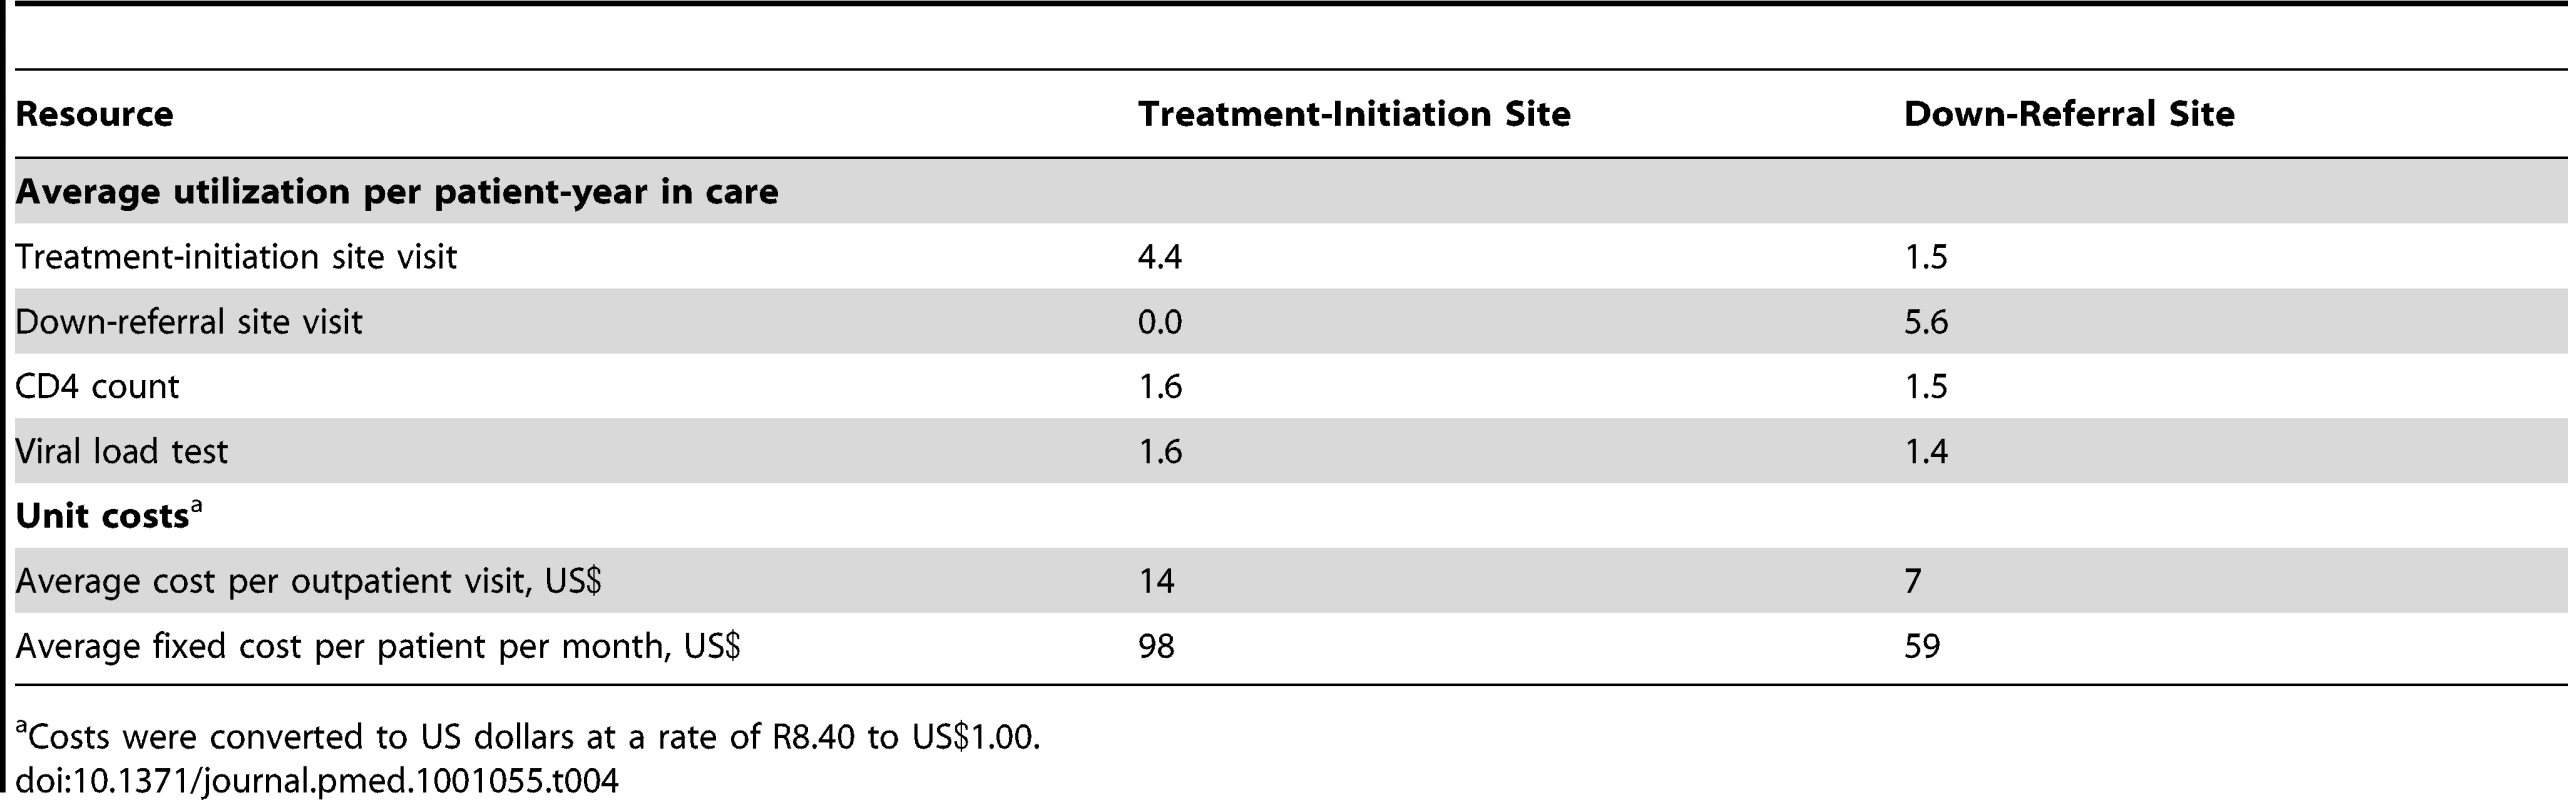 Average resource utilization and selected unit costs for the study sample (<i>n</i> = 2,160) over 12 mo from the date of down-referral eligibility.